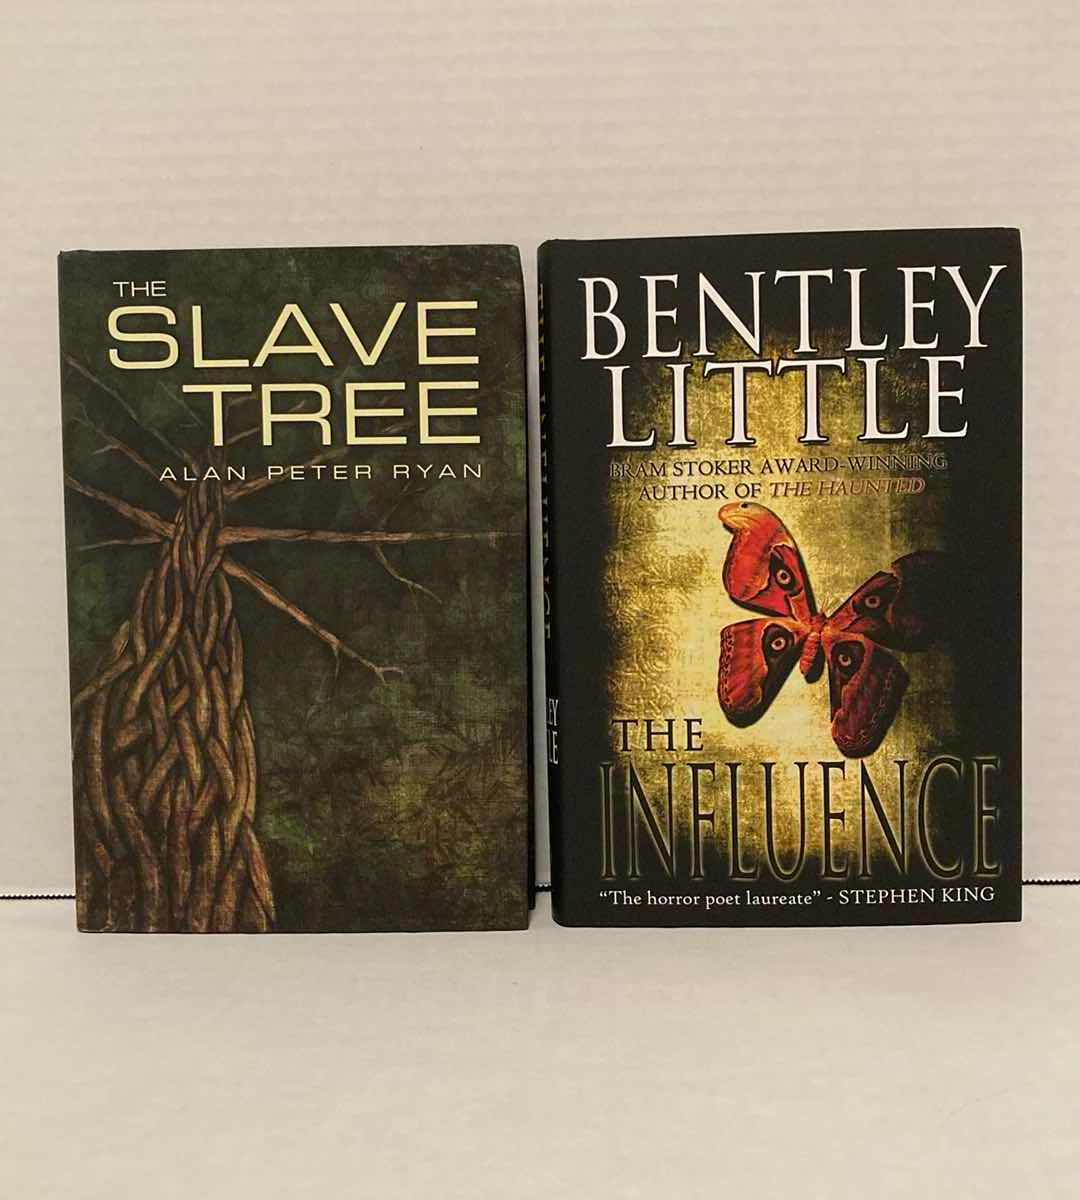 Photo 1 of ALAN PETER RYAN - THE SLAVE TREE & BENTLEY LITTLE - THE INFLUENCE BOOKS (2)